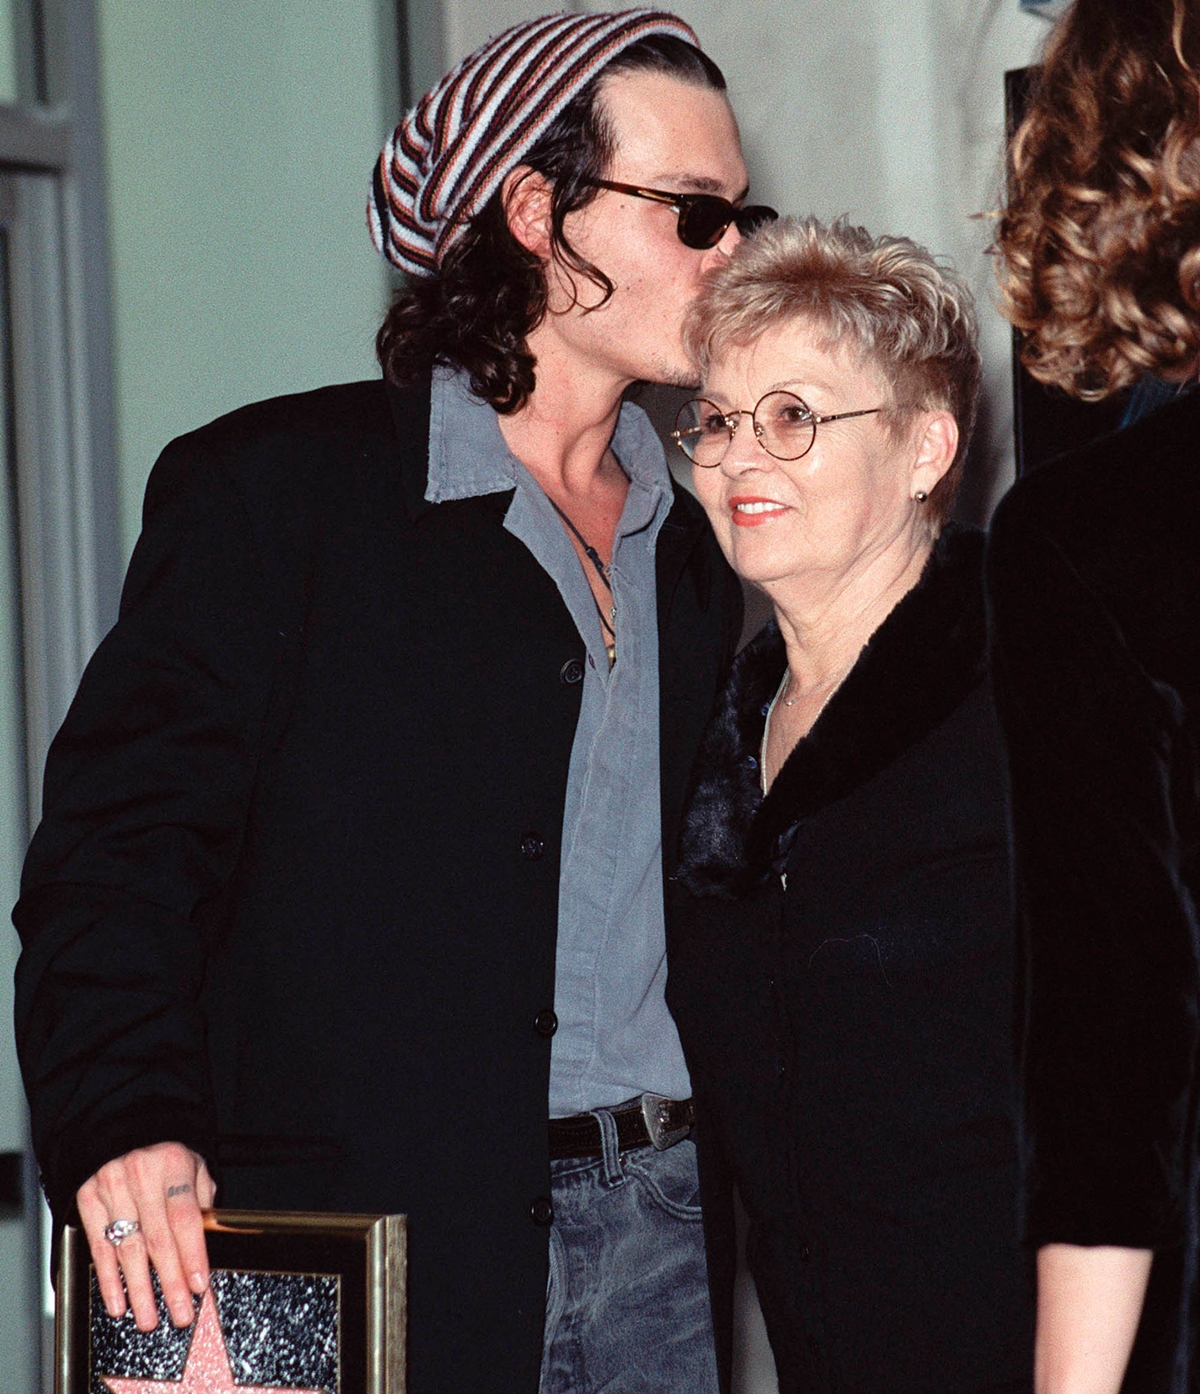 Johnny Depp says his mother Betty Sue Palmer was "violent" and "cruel" to him when growing up